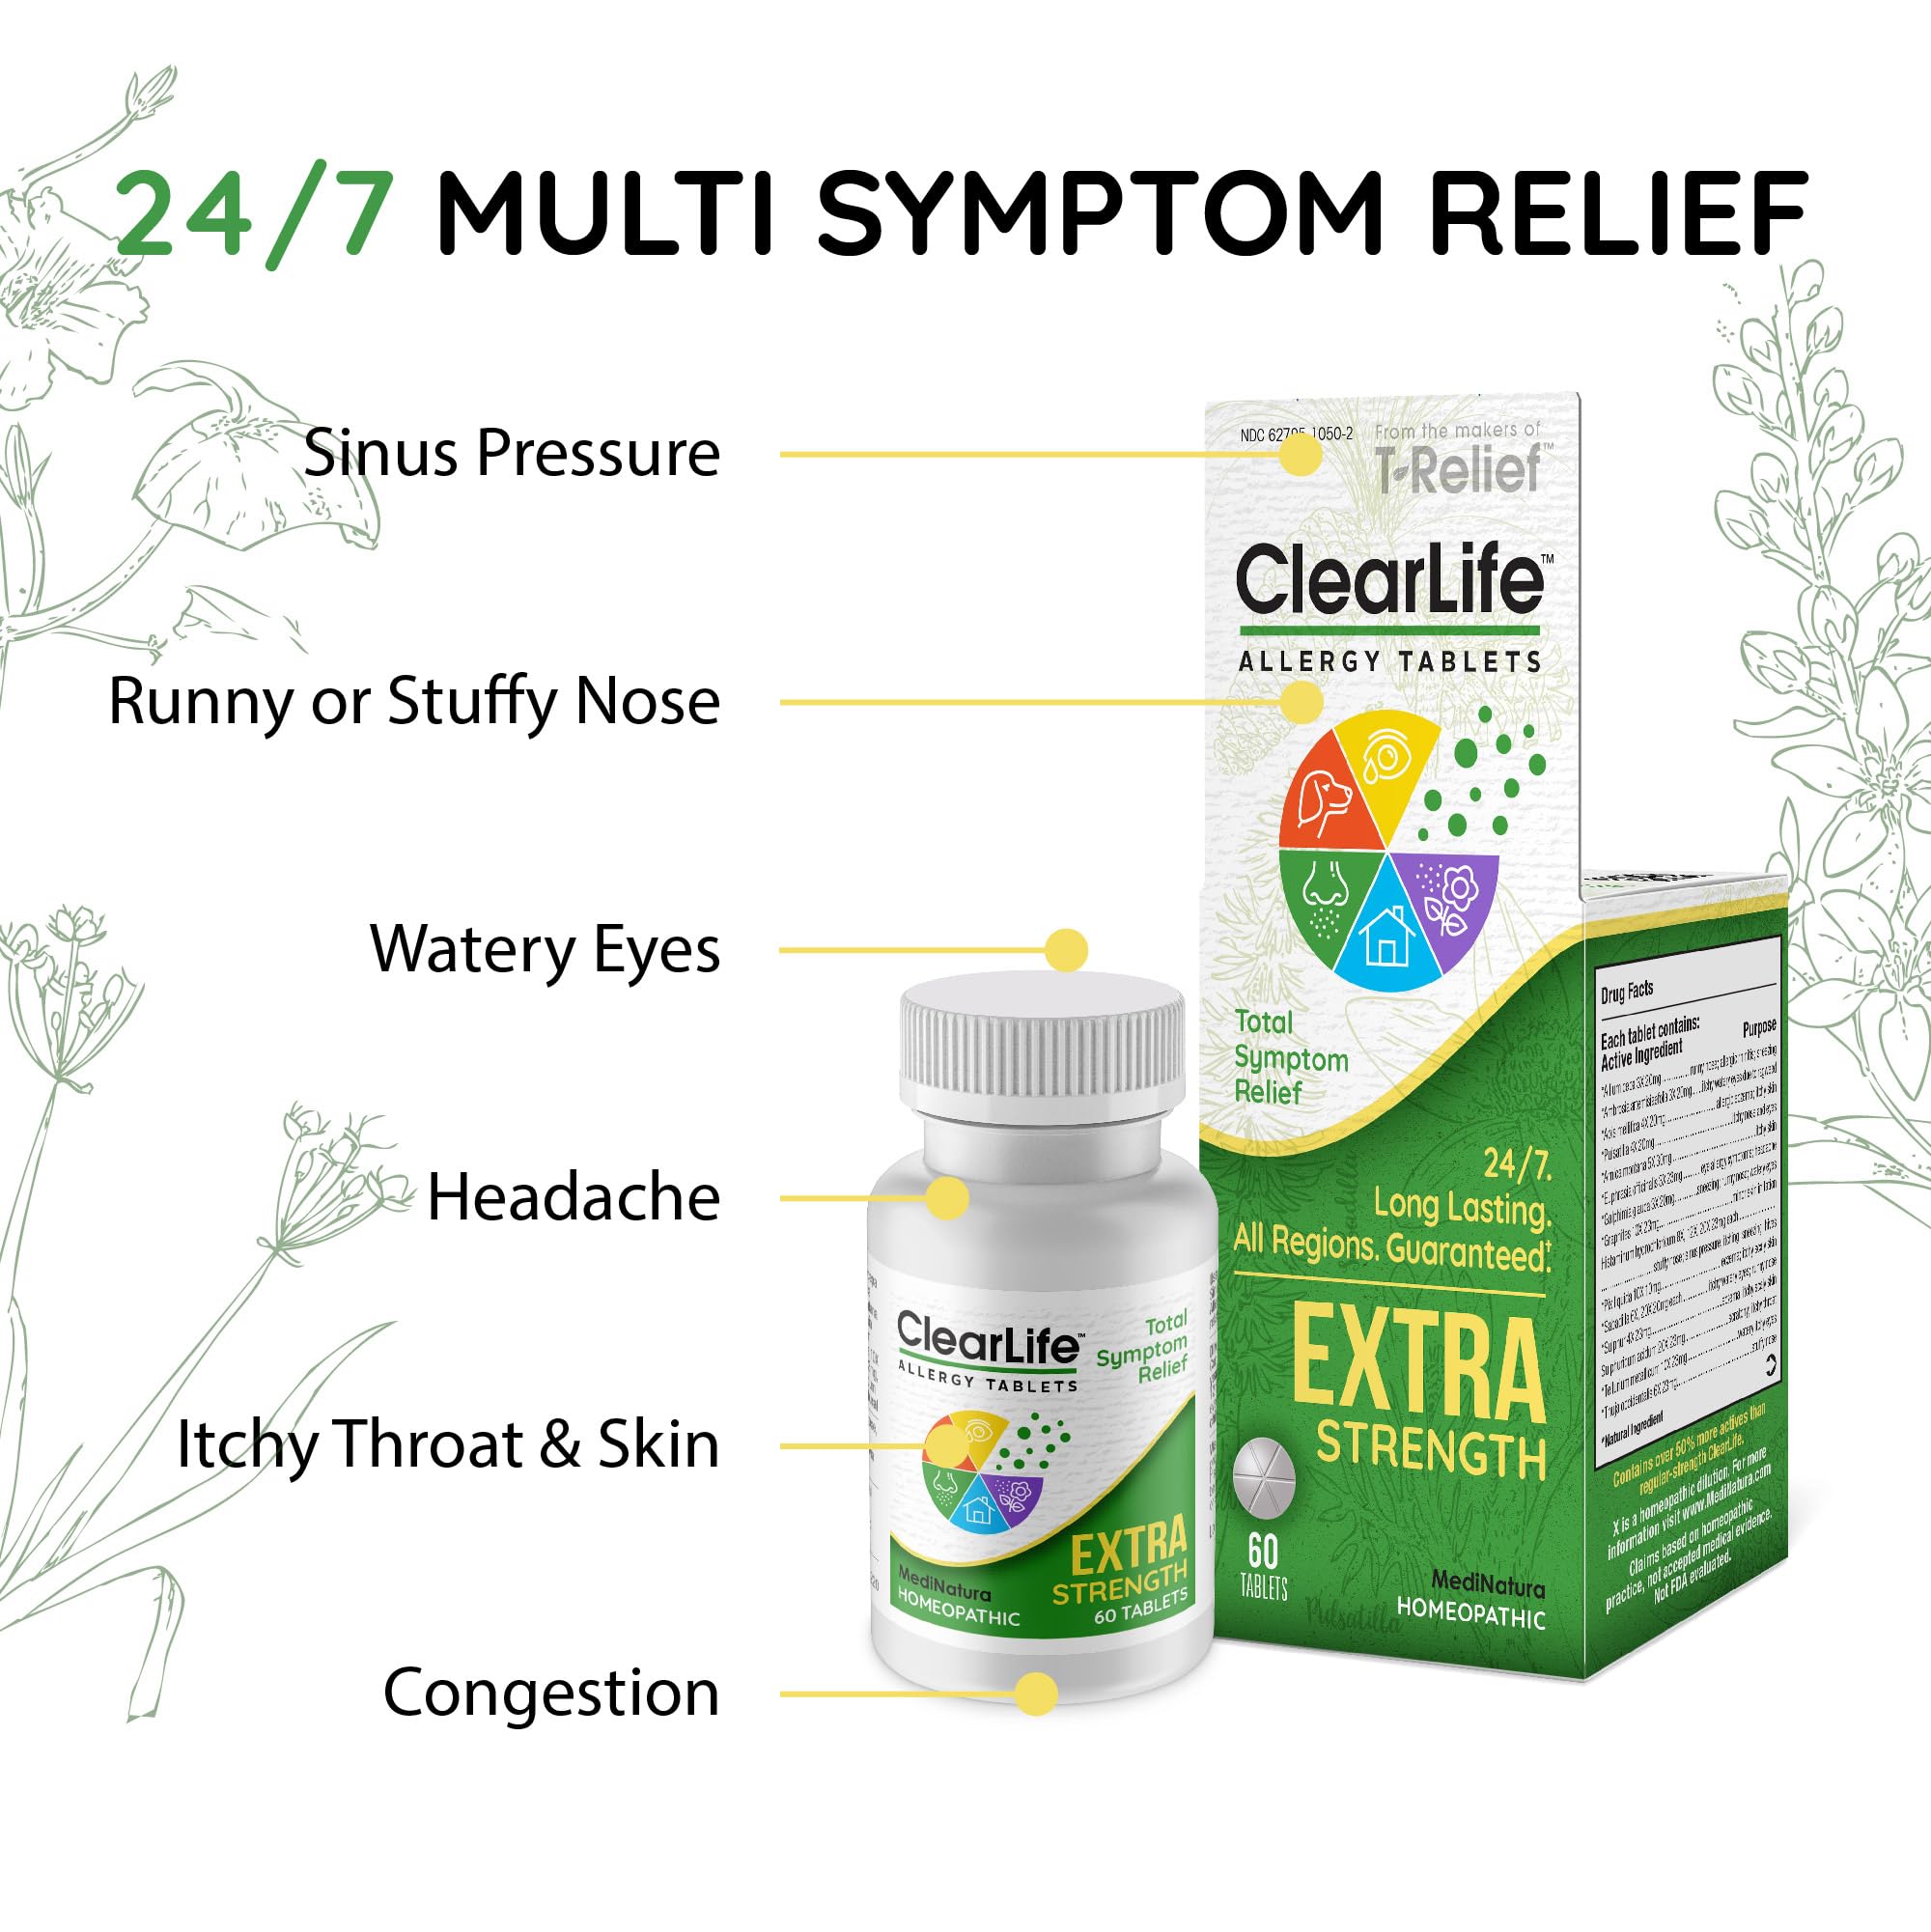 ClearLife Extra Strength Multi-System Allergy Relieving Homeopathic Remedy - 15 Powerful Actives Provide Potent Maximum Congestion, Itchiness & Sinus Pressure Relief - Non-Drowsy - 60 Tablets